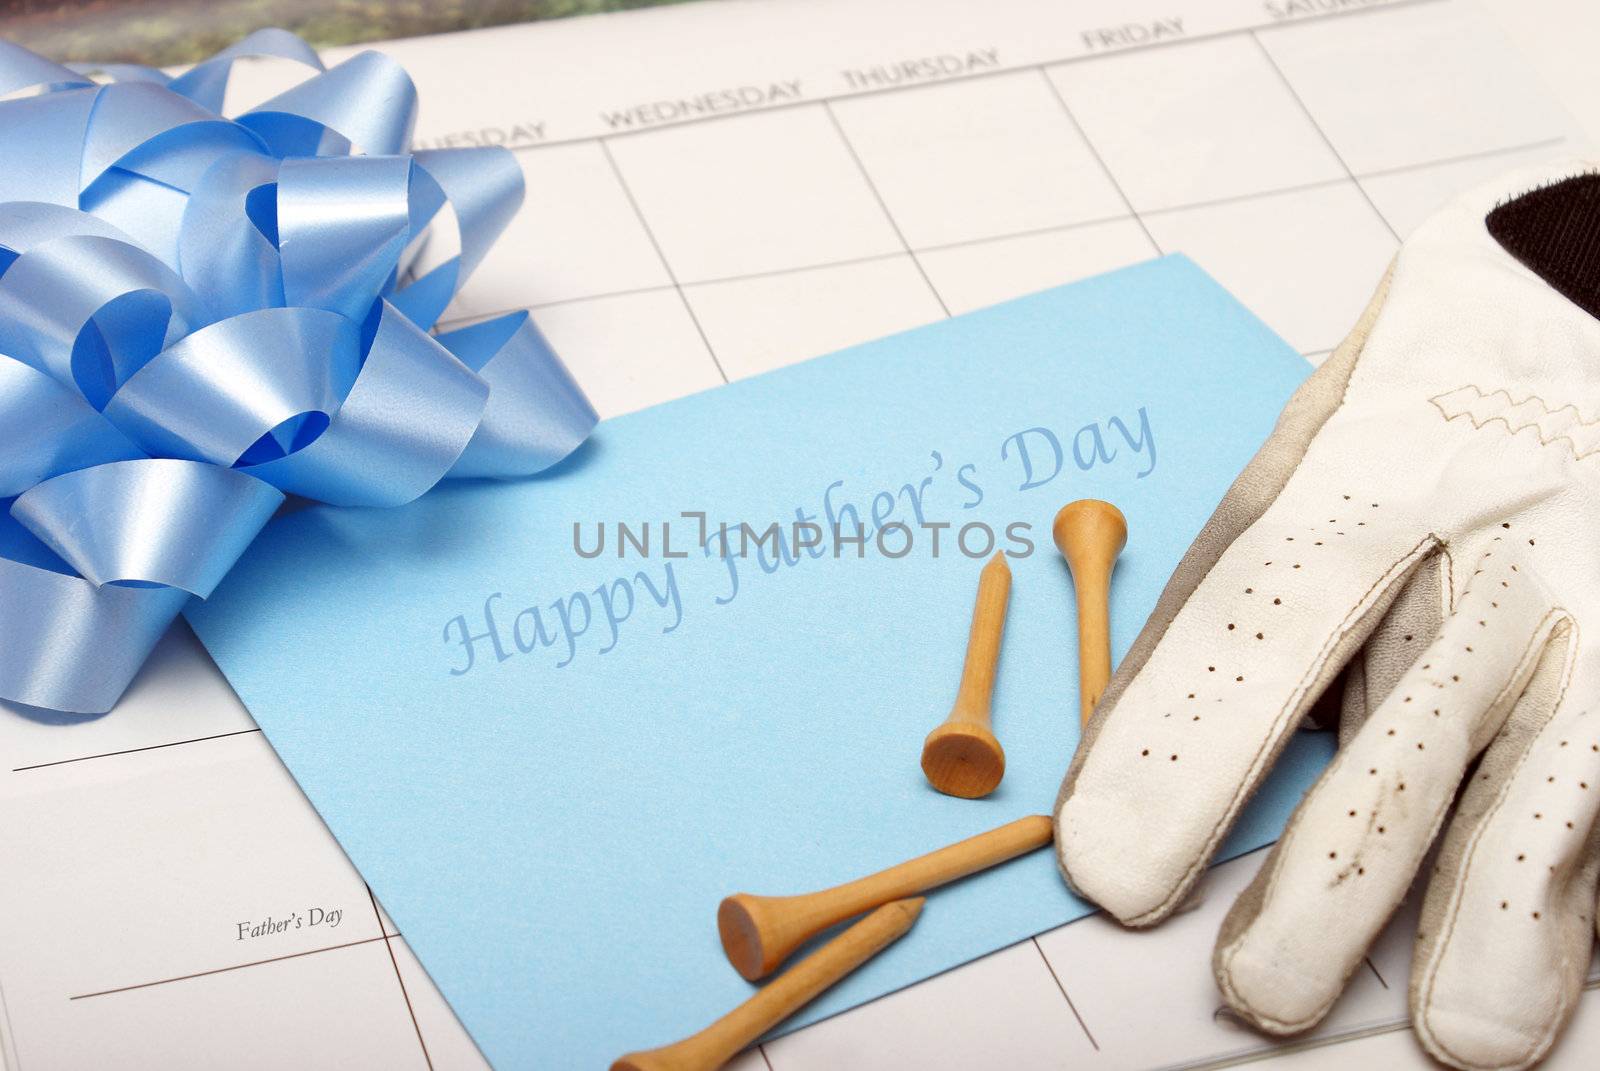 A card for father lays on a calendar with other accesories for the celebration.